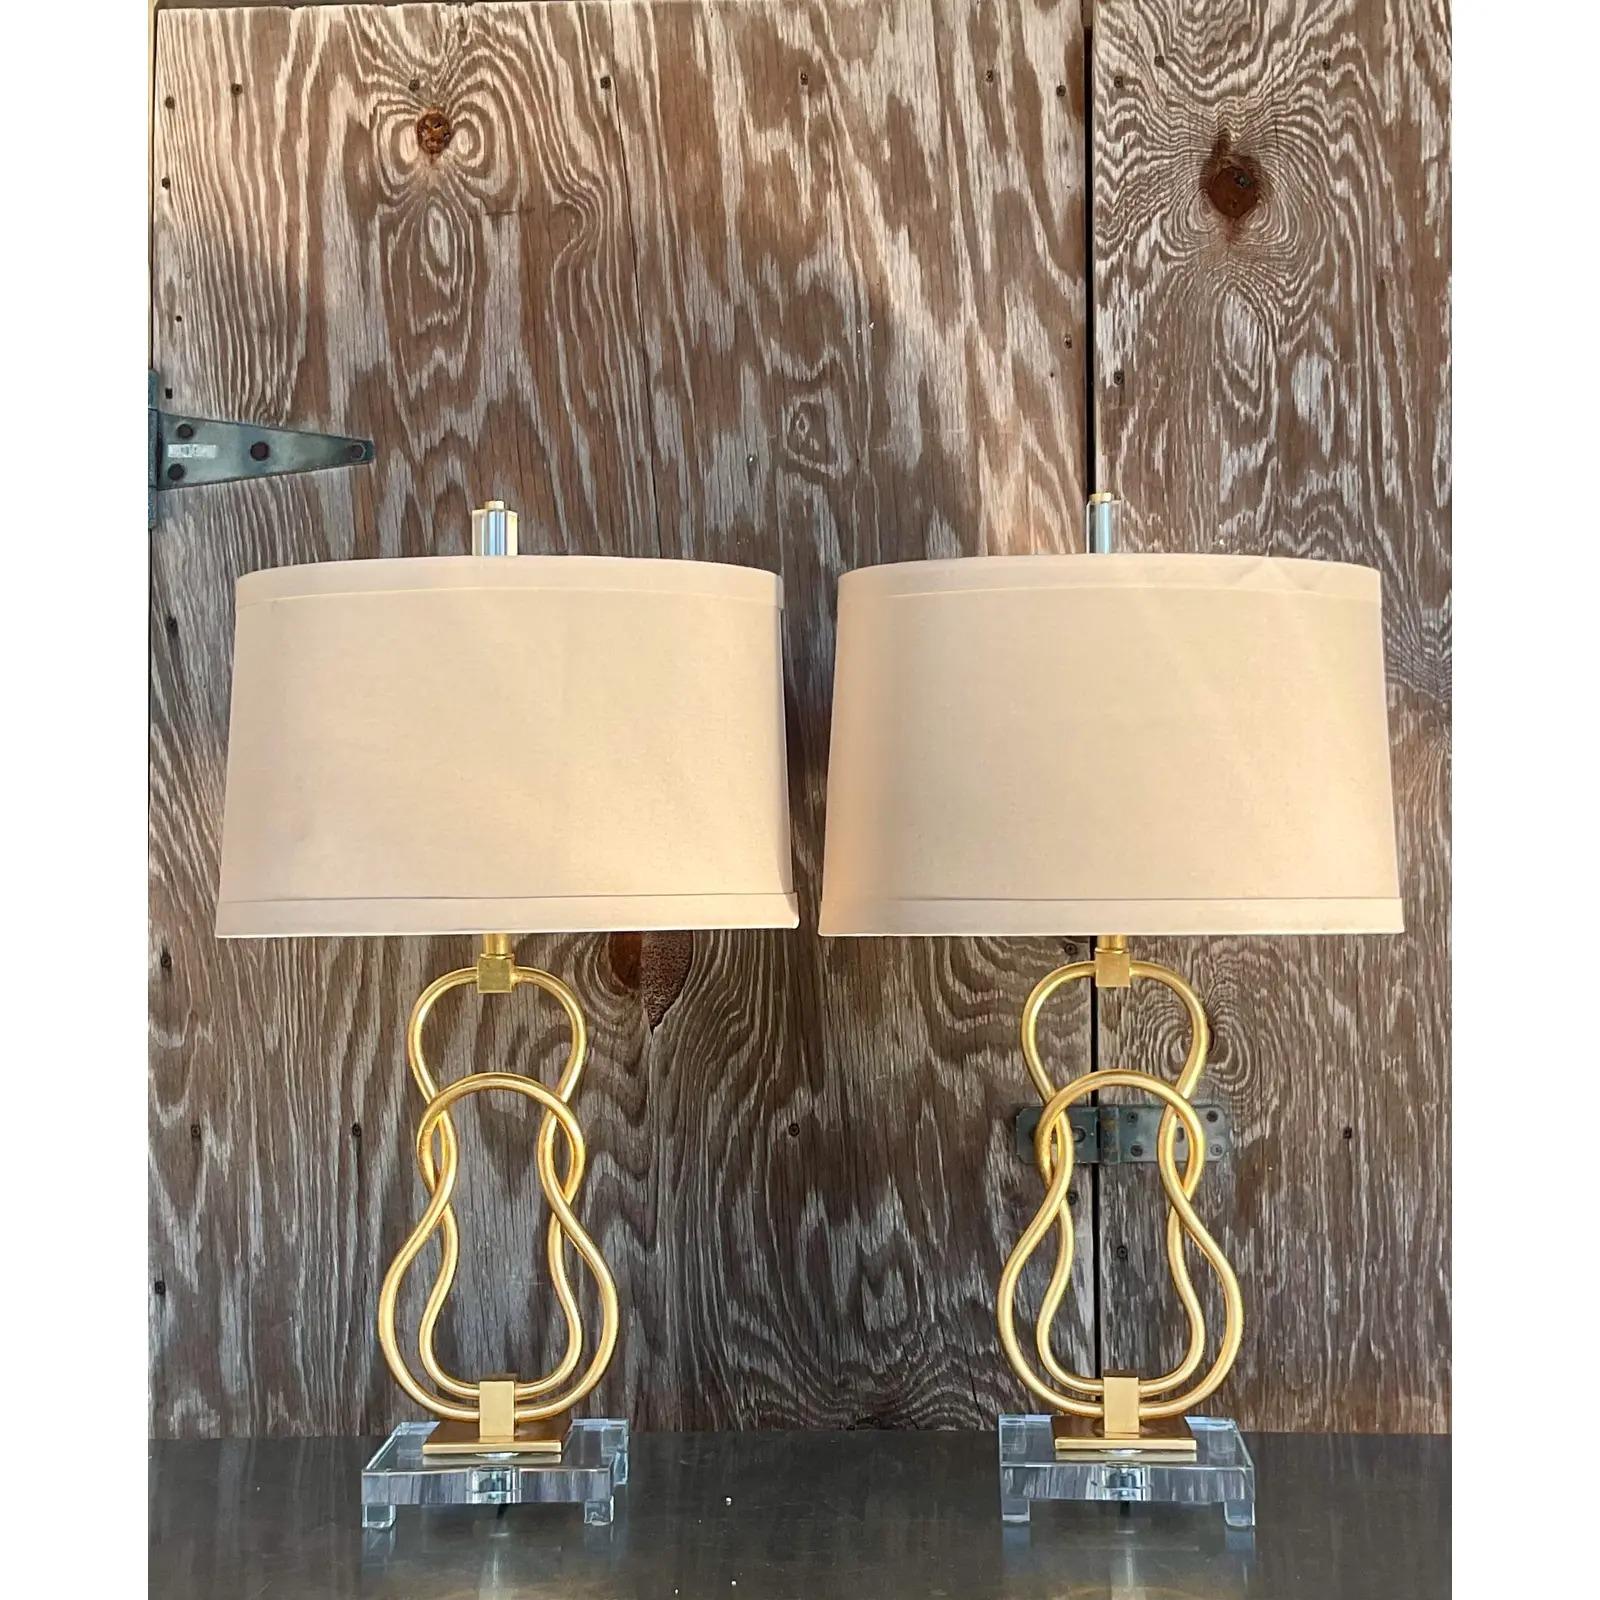 Lucite Vintage Contemporary Linked Gilt Rings Lamps - a Pair For Sale